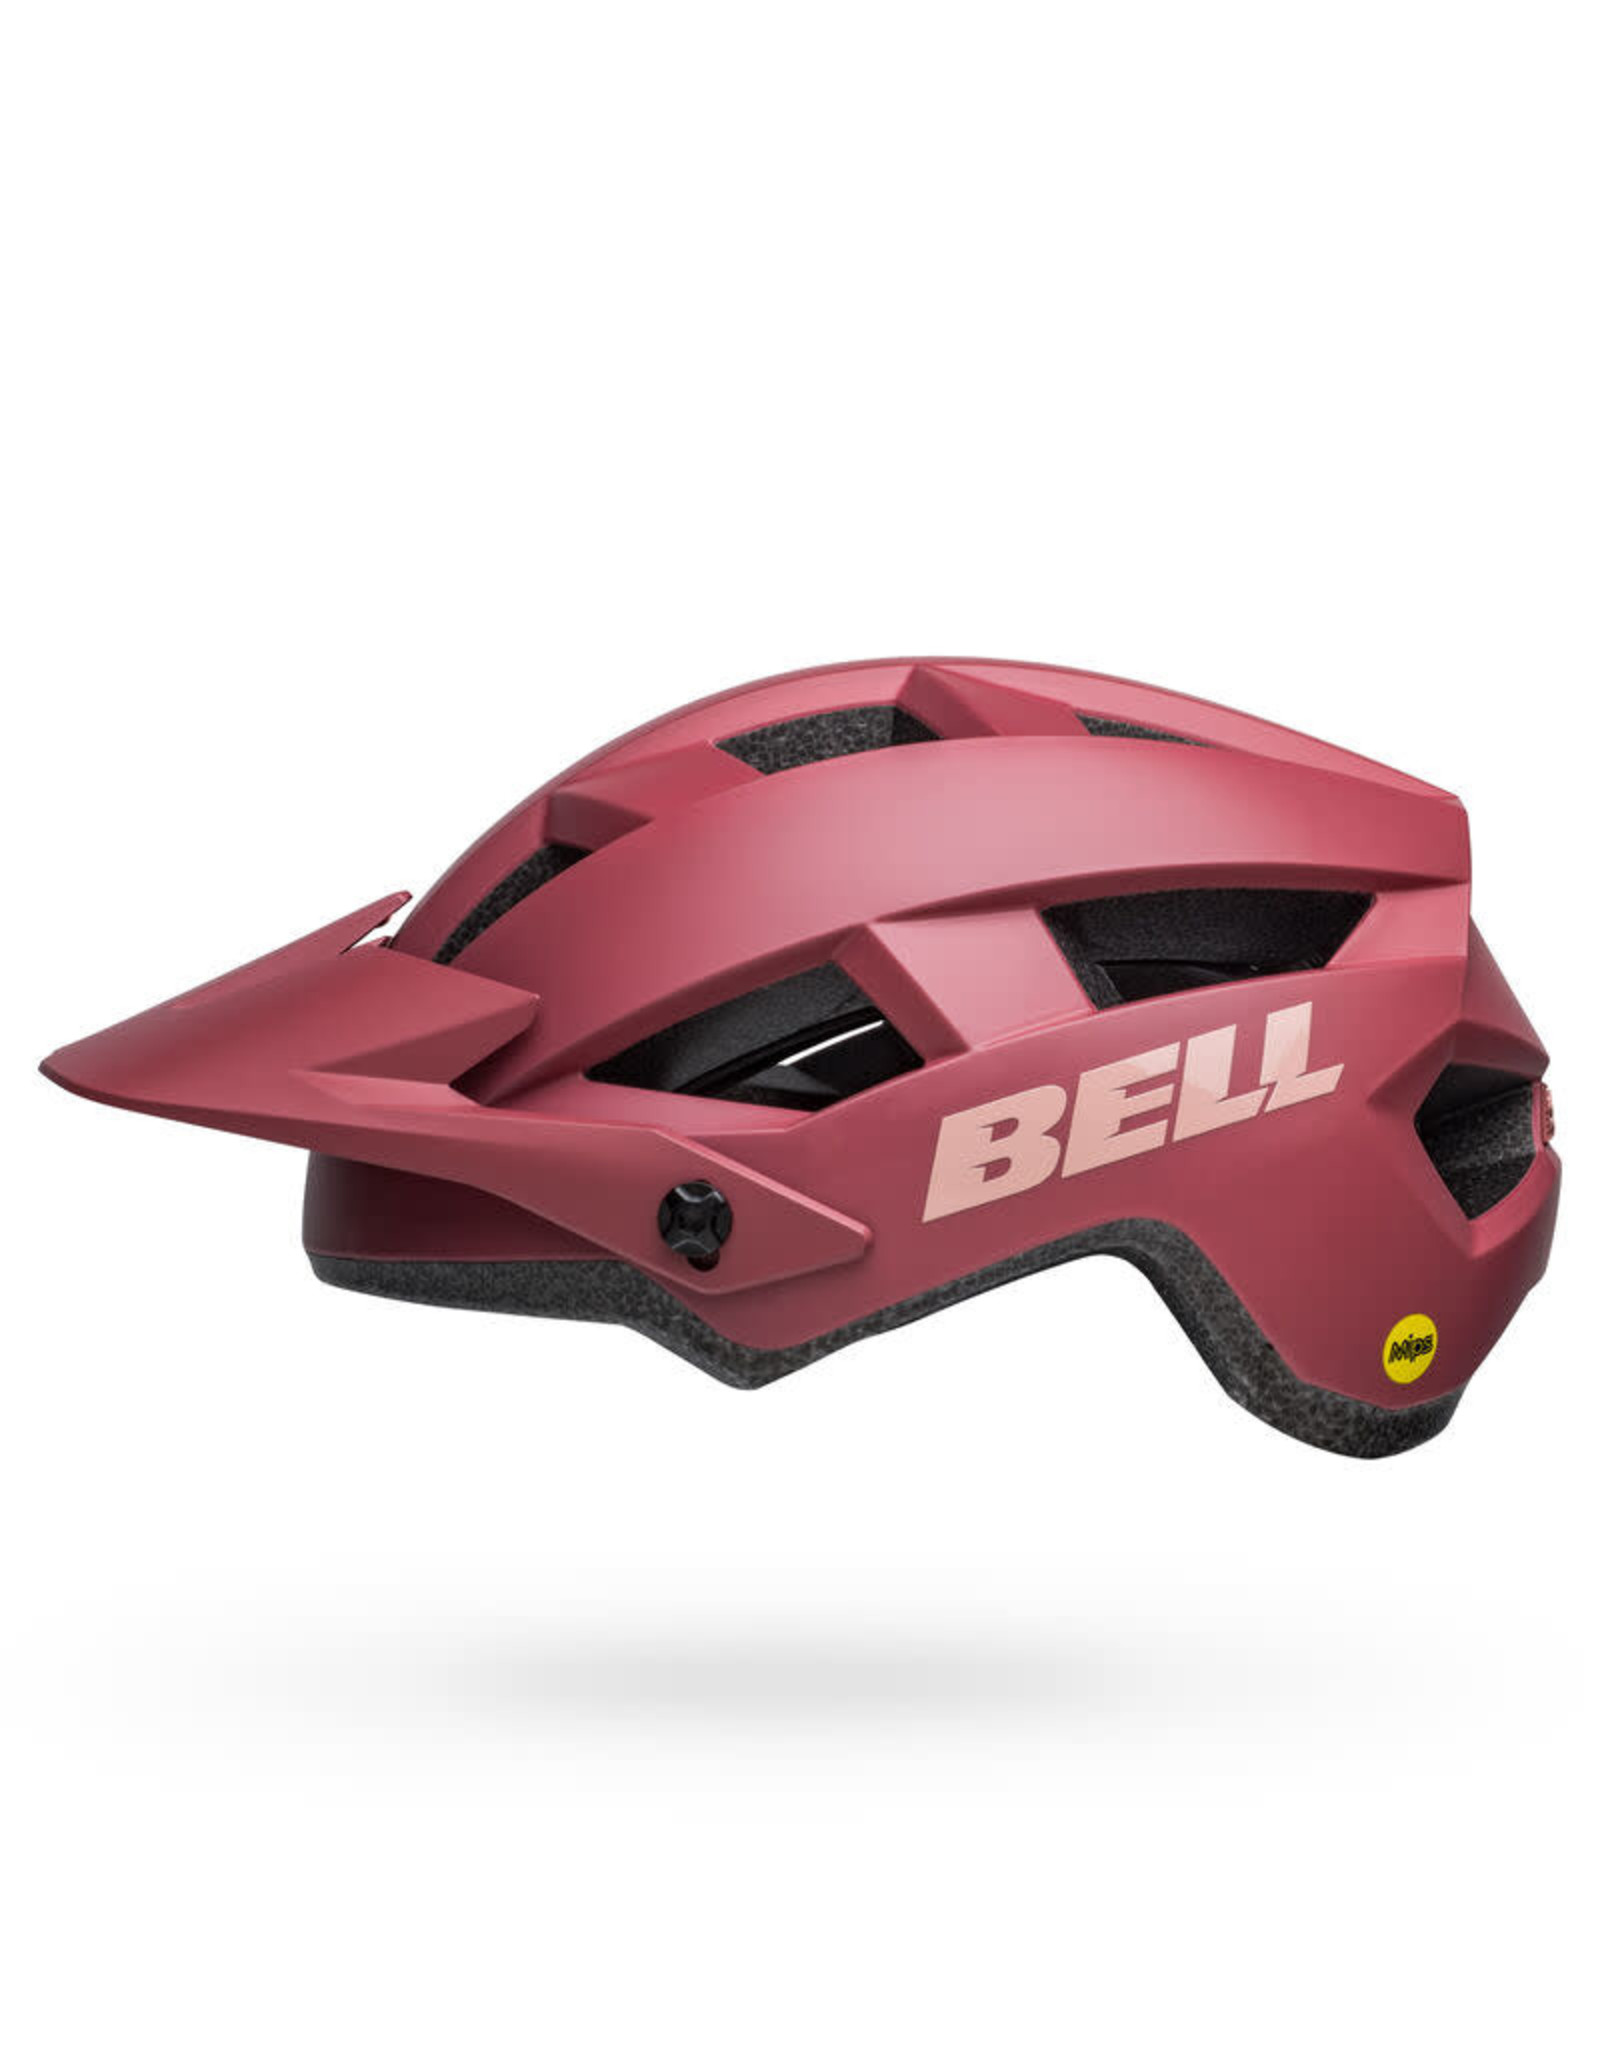 Bell Spark 2 Mips